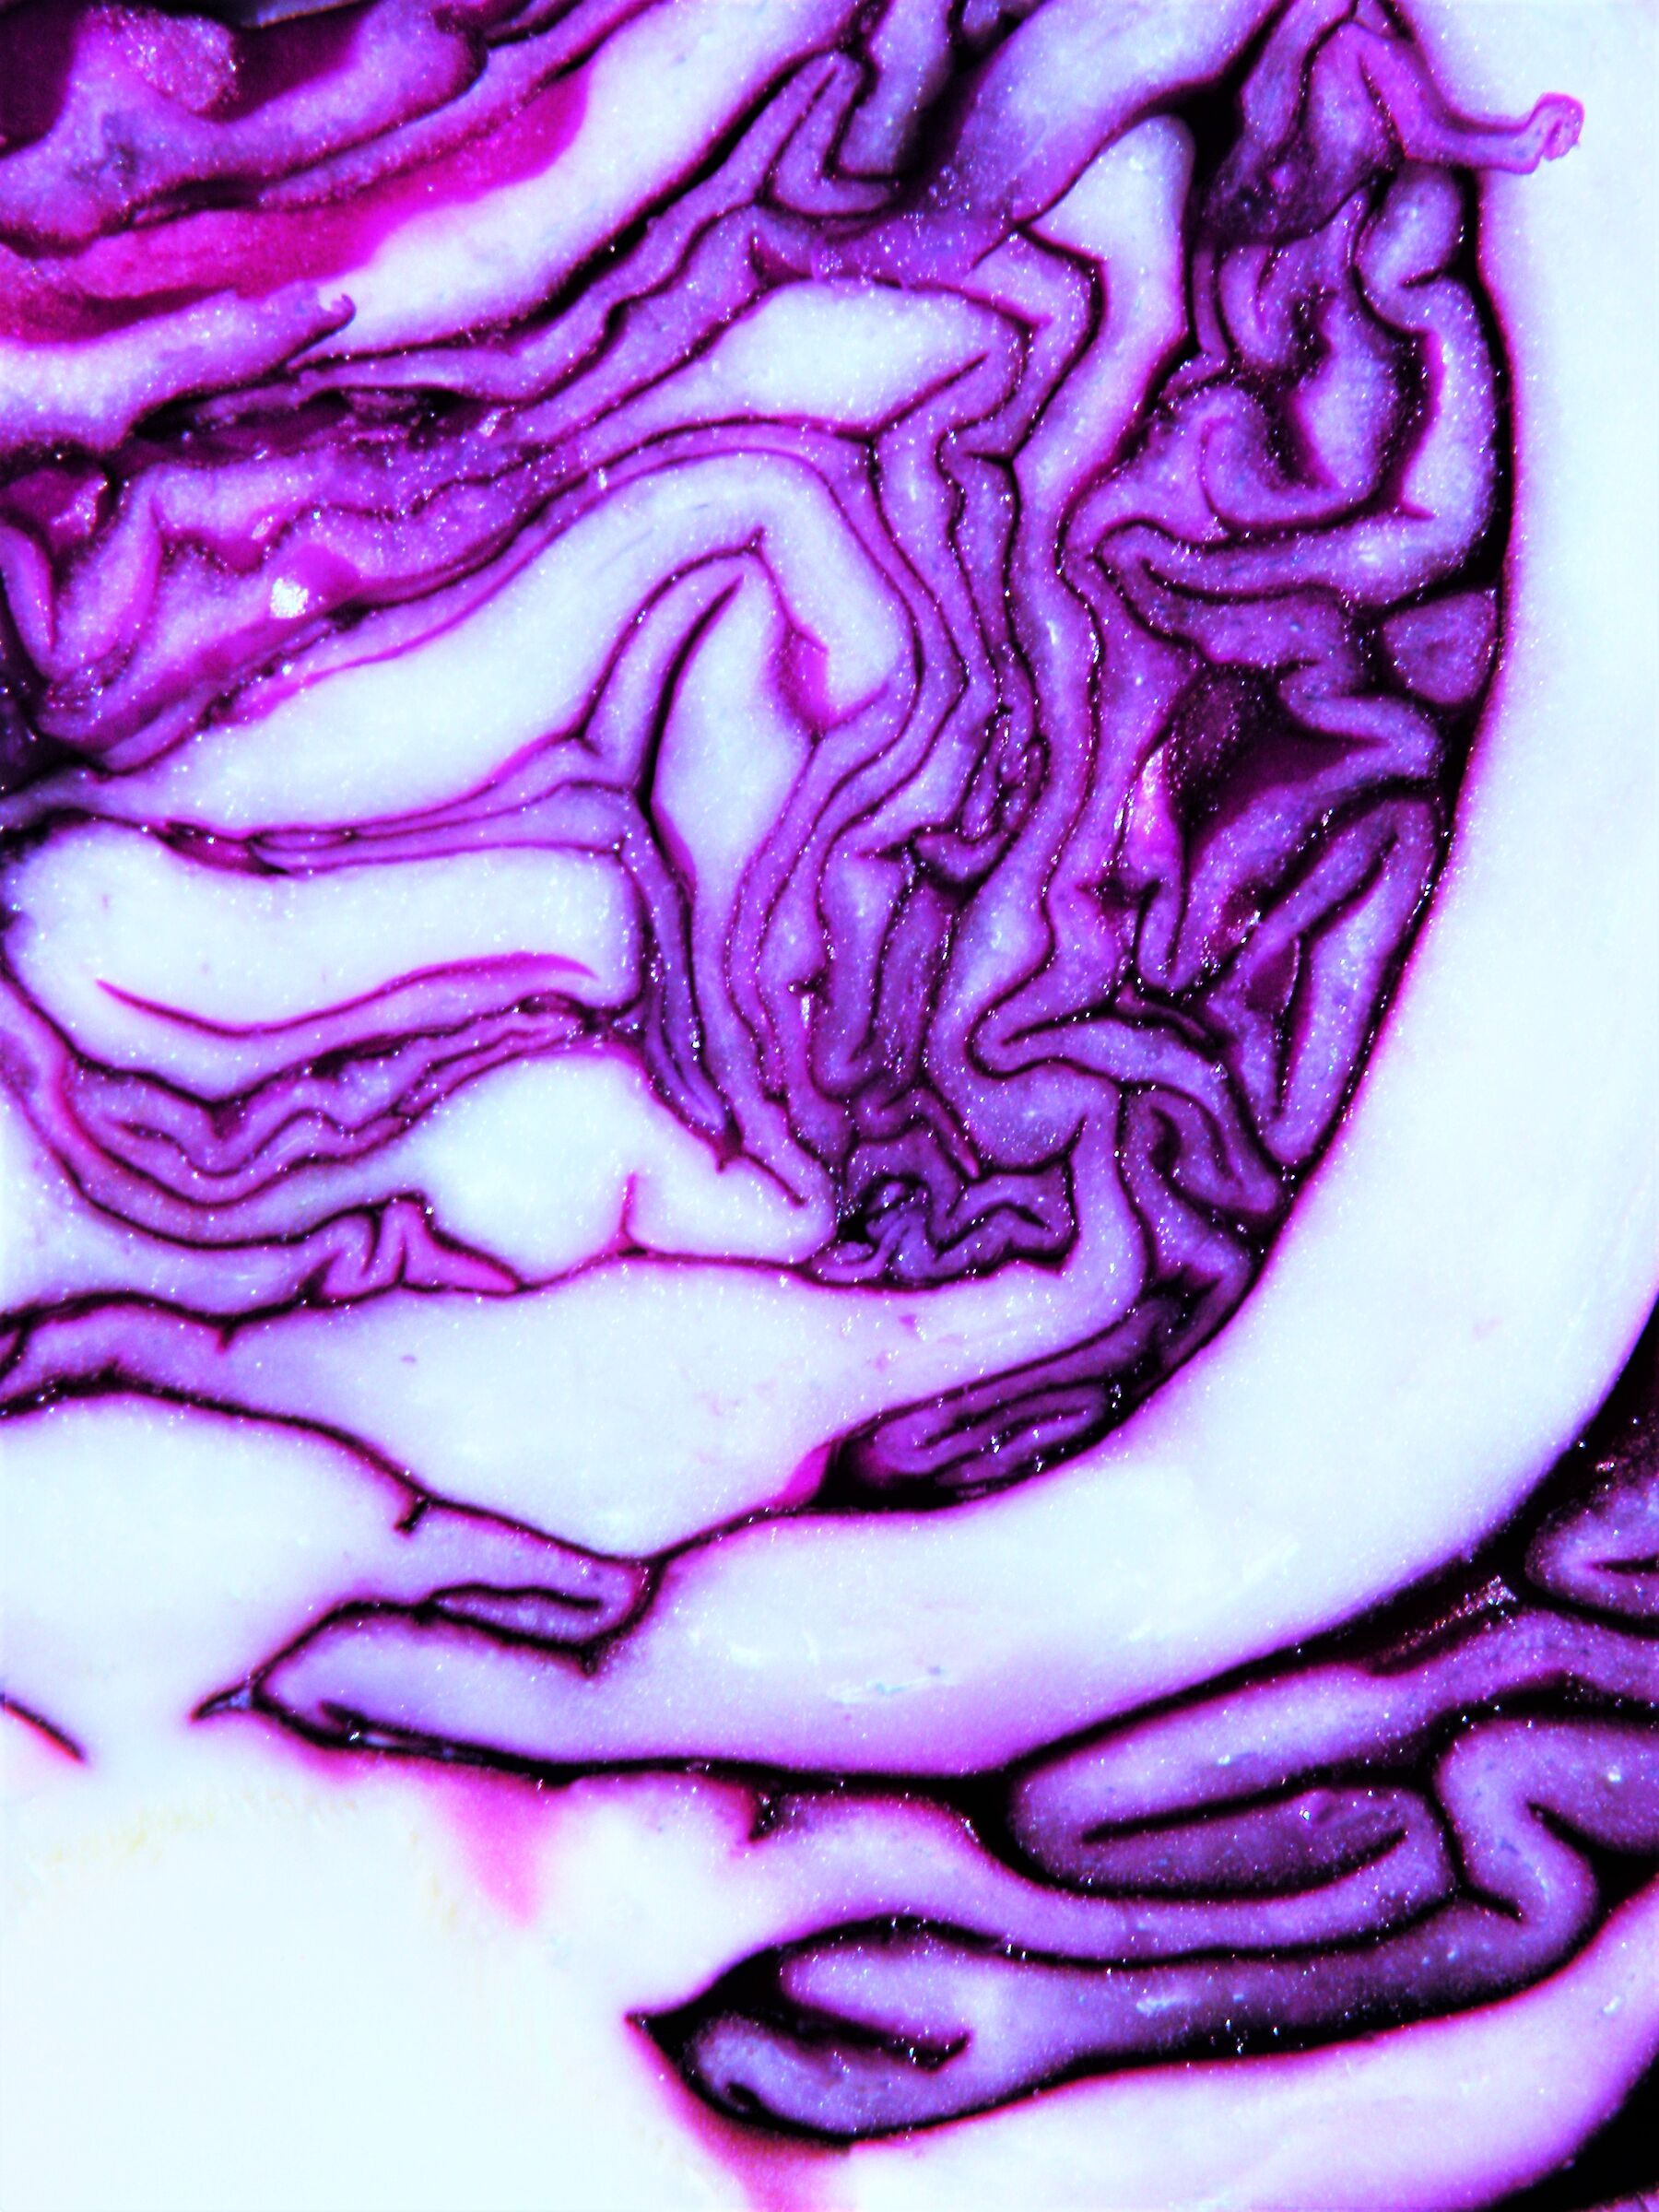  Red Cabbage...